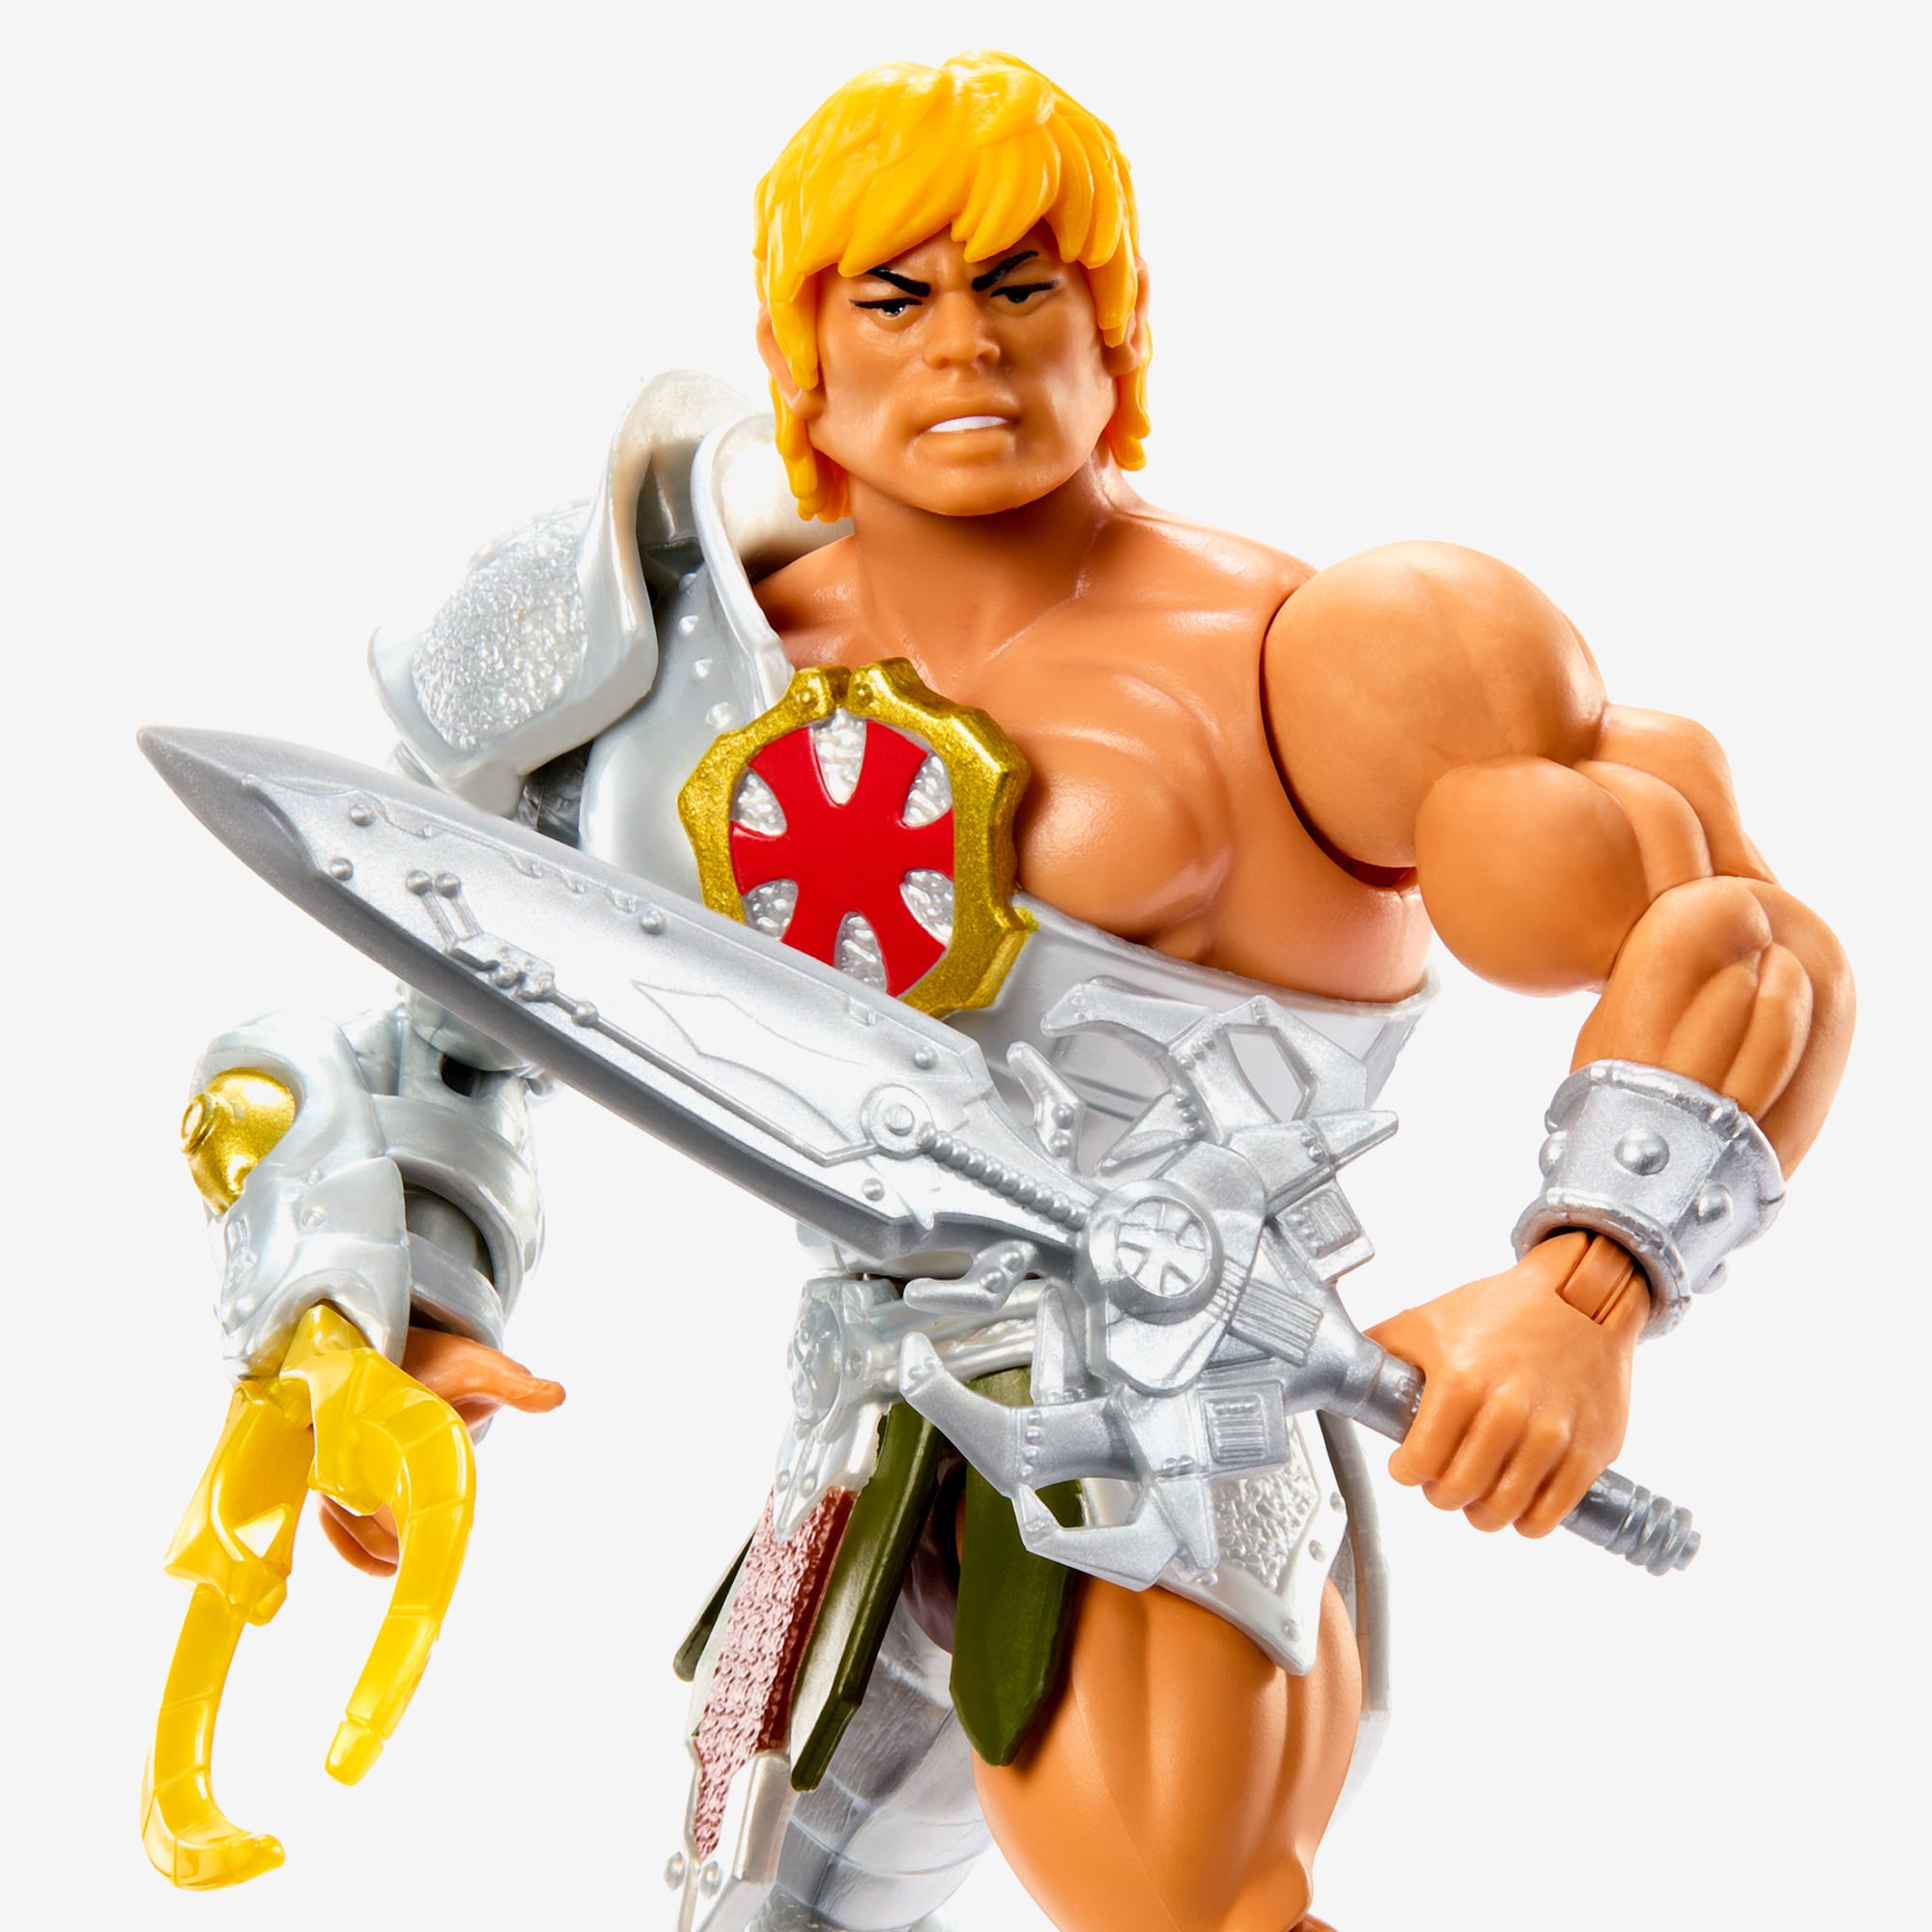 Masters of the universe Origins He-Man Snake Armor Figure Silver